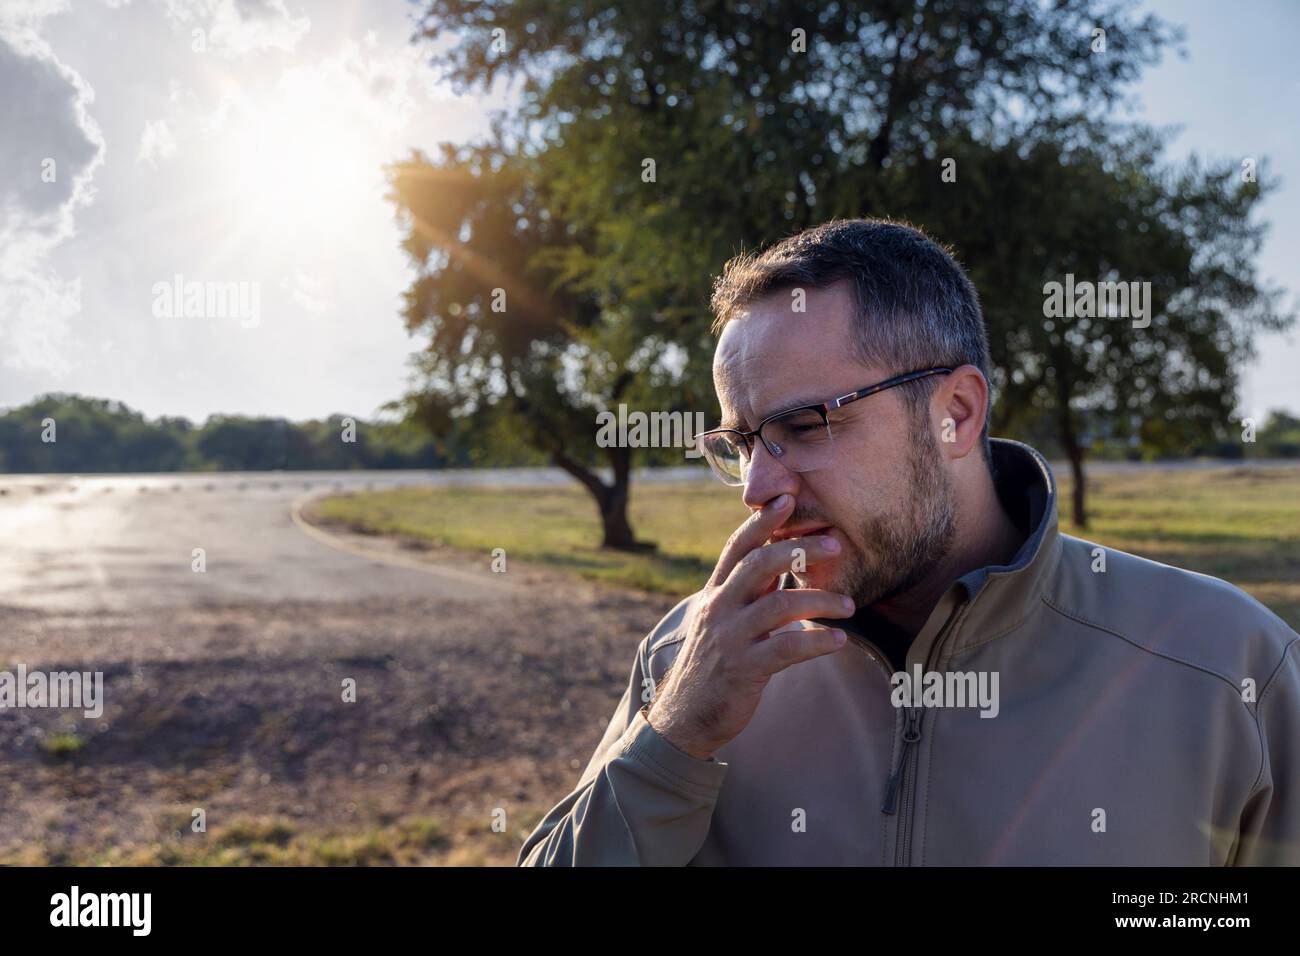 caucasian man with glasses and a beard, standing outside the car on the road, worried about what just happened Stock Photo